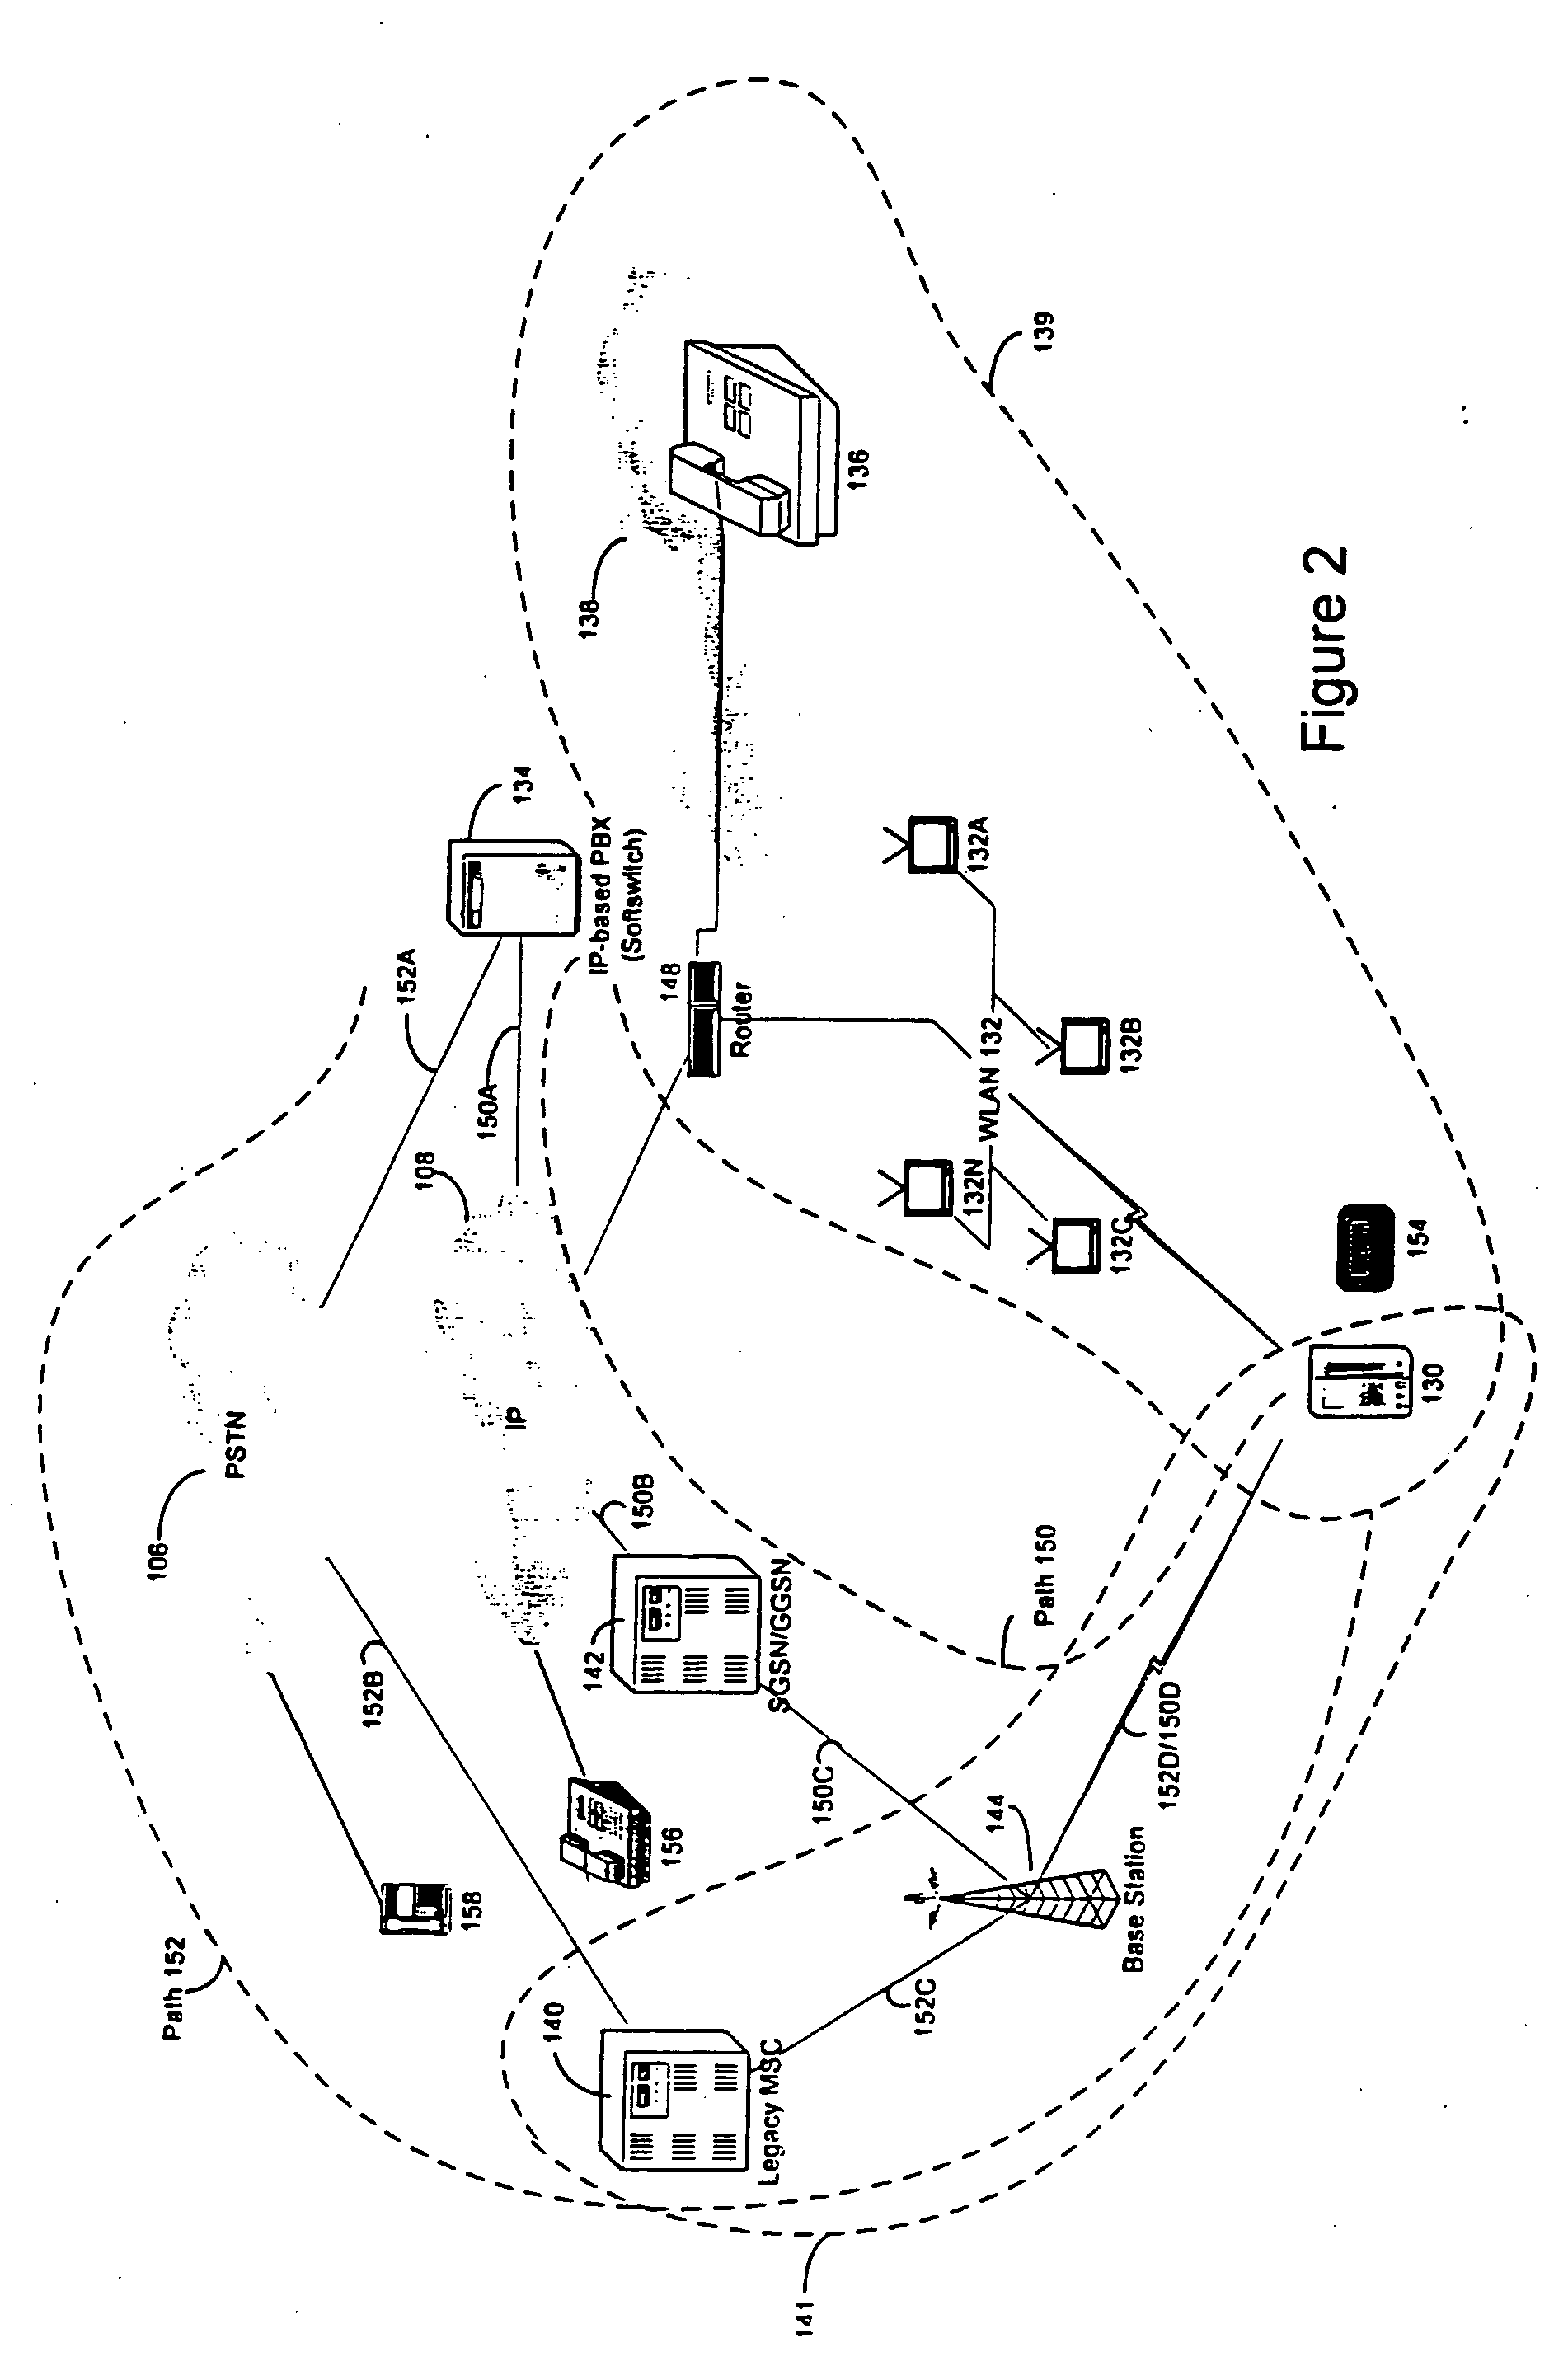 Extension of a local area phone system to a wide area network